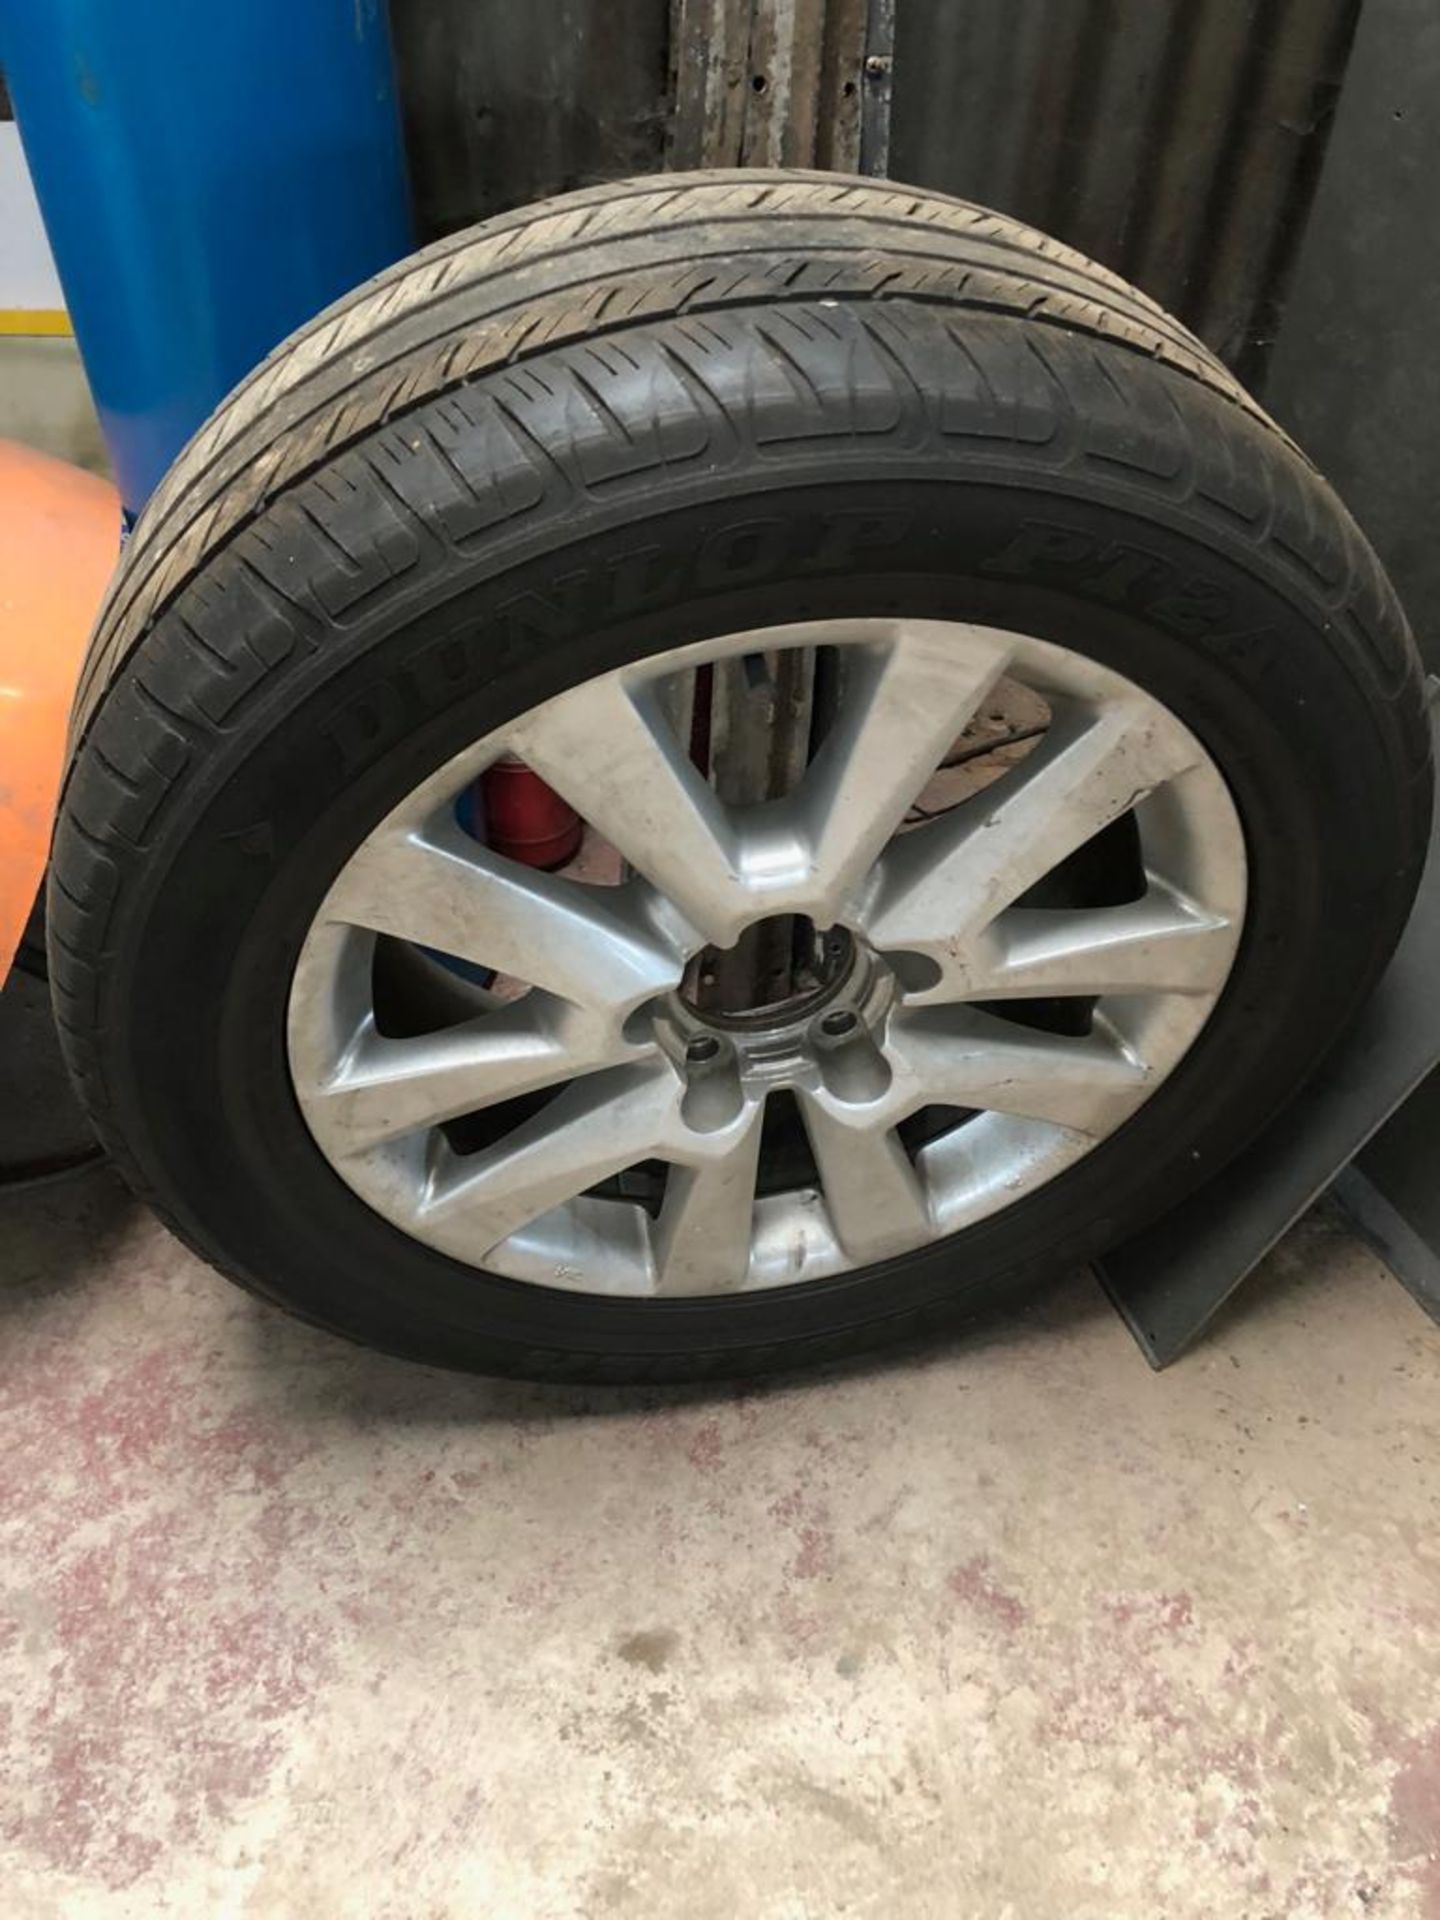 20" TOYOTA LAND-CRUISER WHEEL, REMOVED AS A SPARE WHEEL *PLUS VAT*